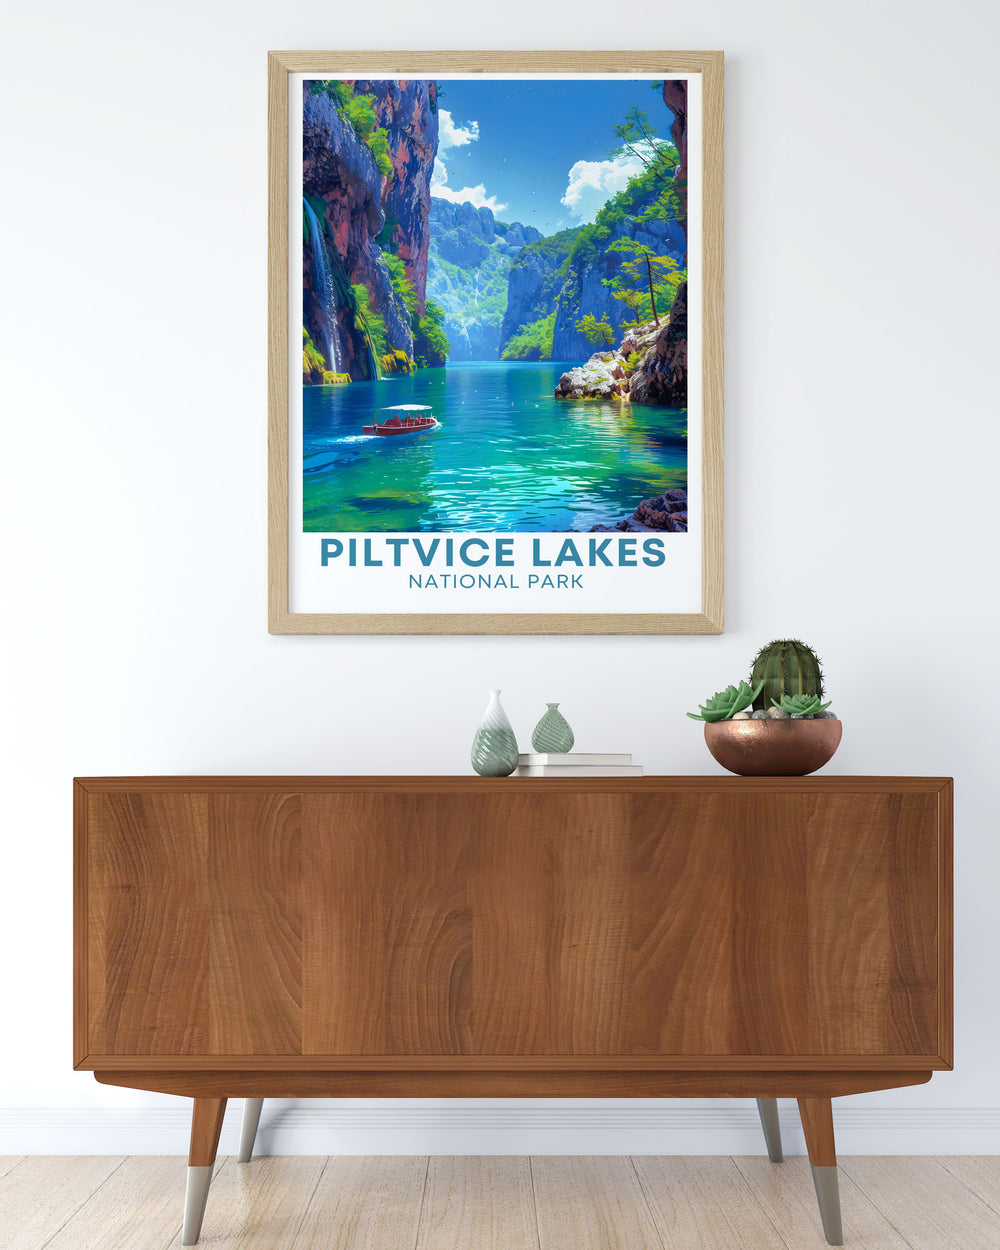 Stunning Kozjak Lake print showcasing the natural beauty of Plitvice Lakes this artwork captures the essence of Croatias picturesque scenery making it an excellent addition to any living room bedroom or office space a must have for art and travel lovers